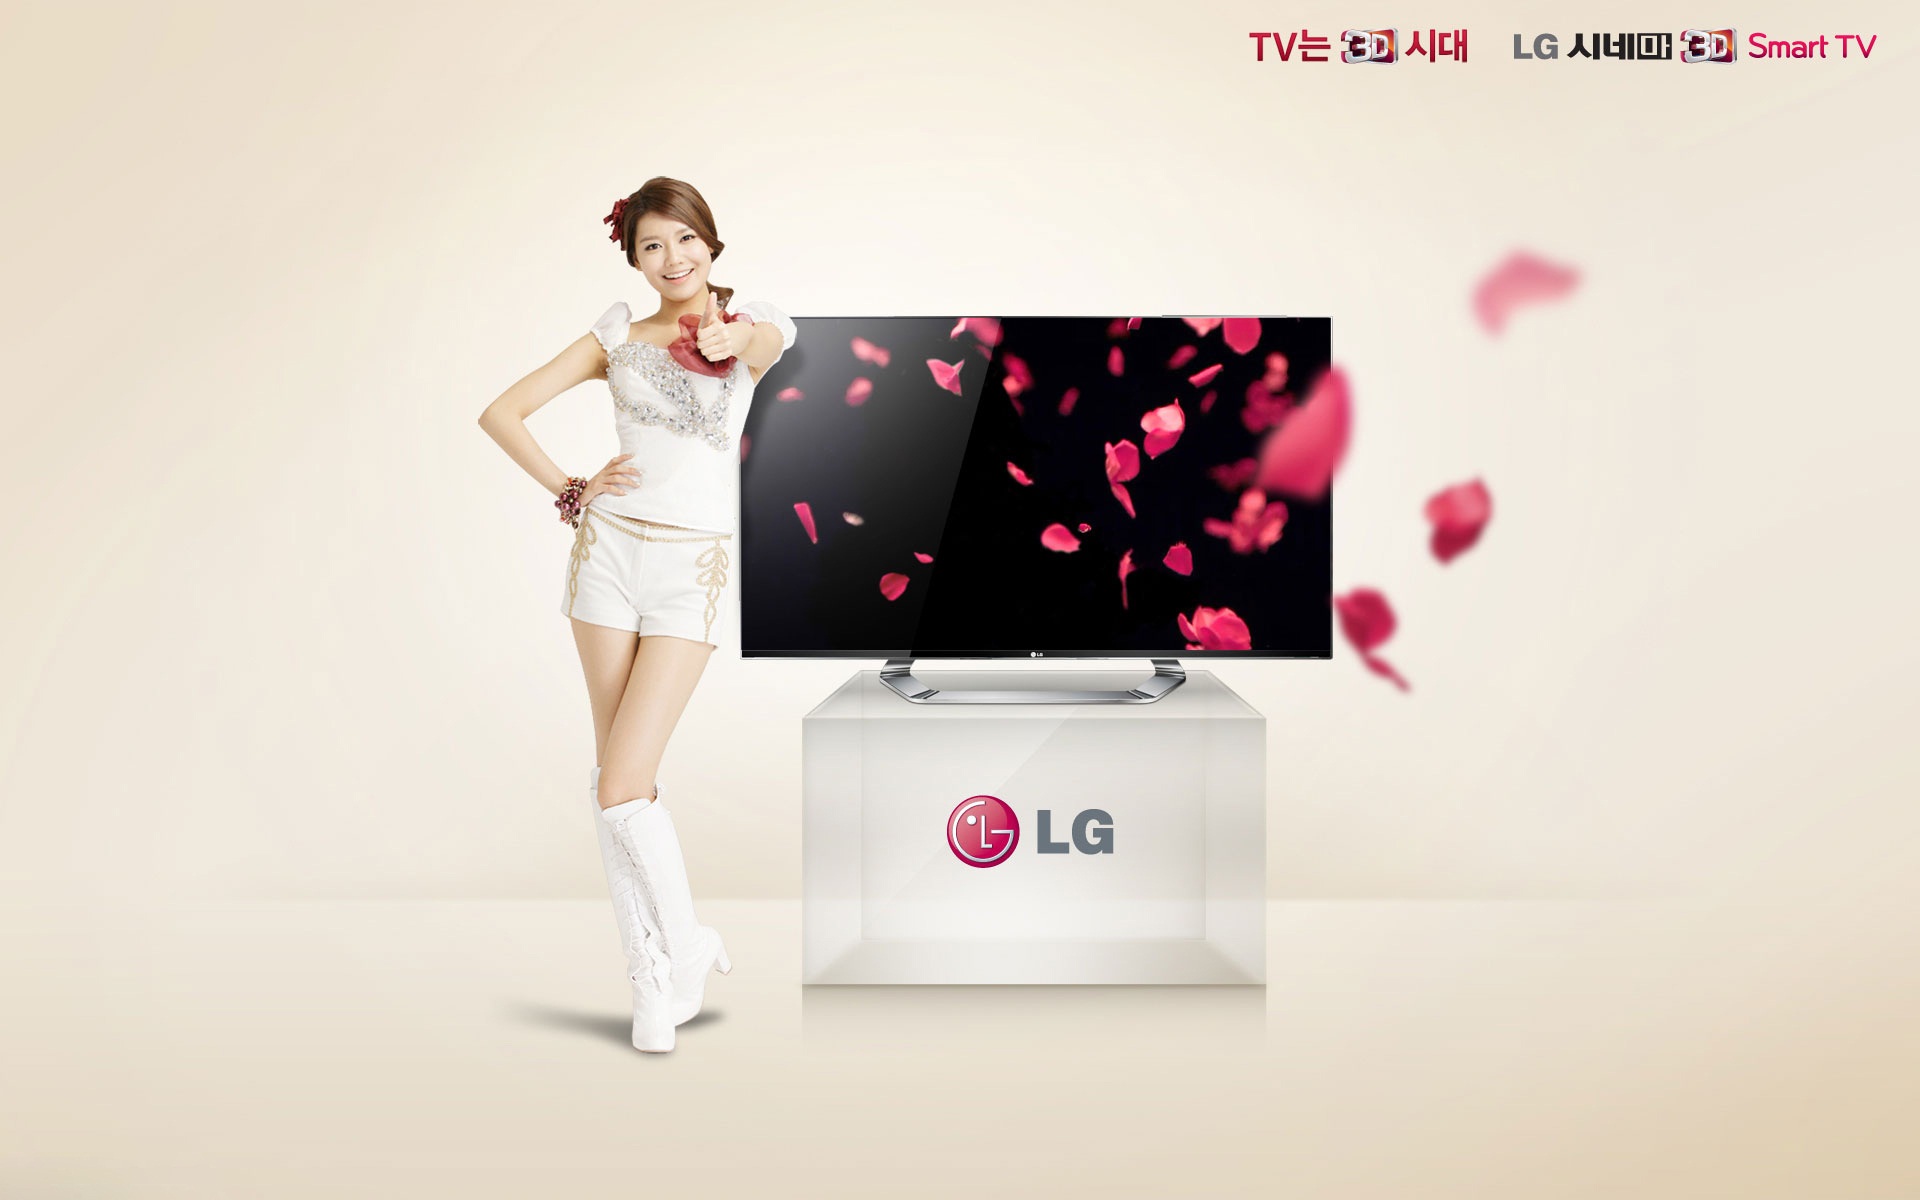 Girls Generation ACE and LG endorsements ads HD wallpapers #12 - 1920x1200